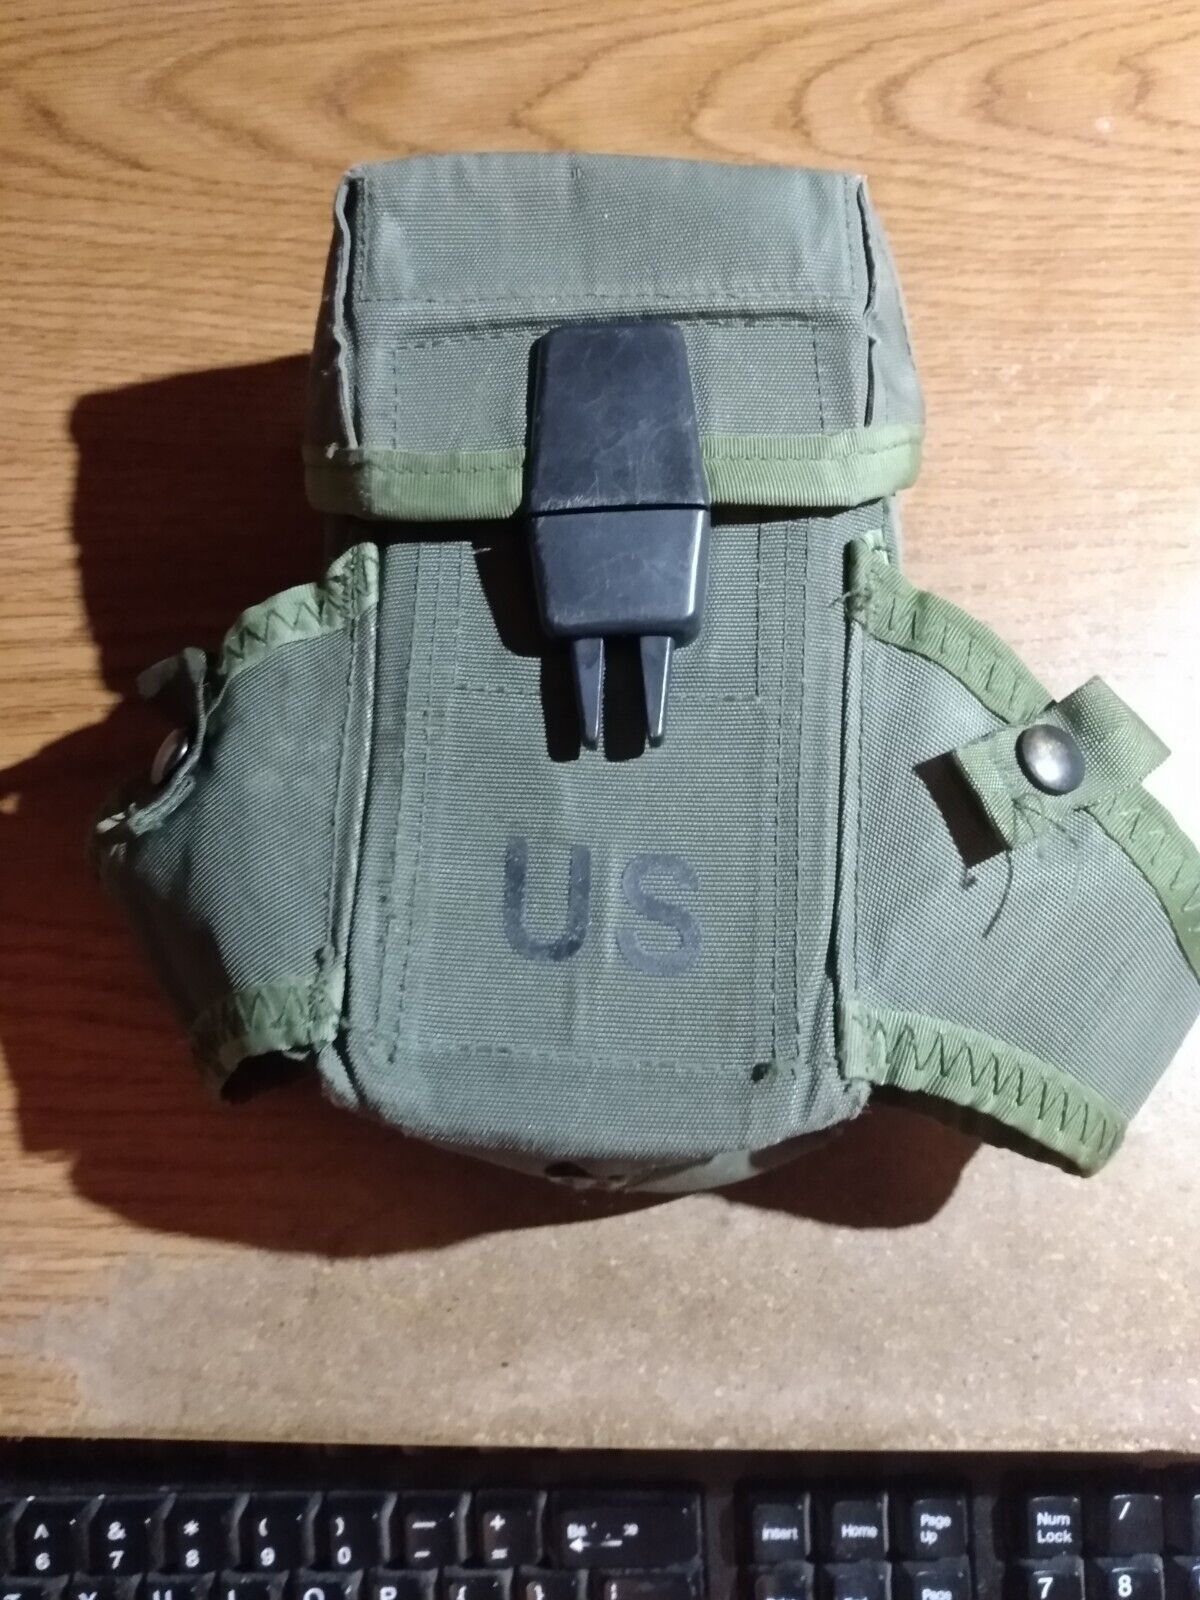 Primary image for Vintage US Army Military Nylon Ammo Pouch 8465-00-001-6482